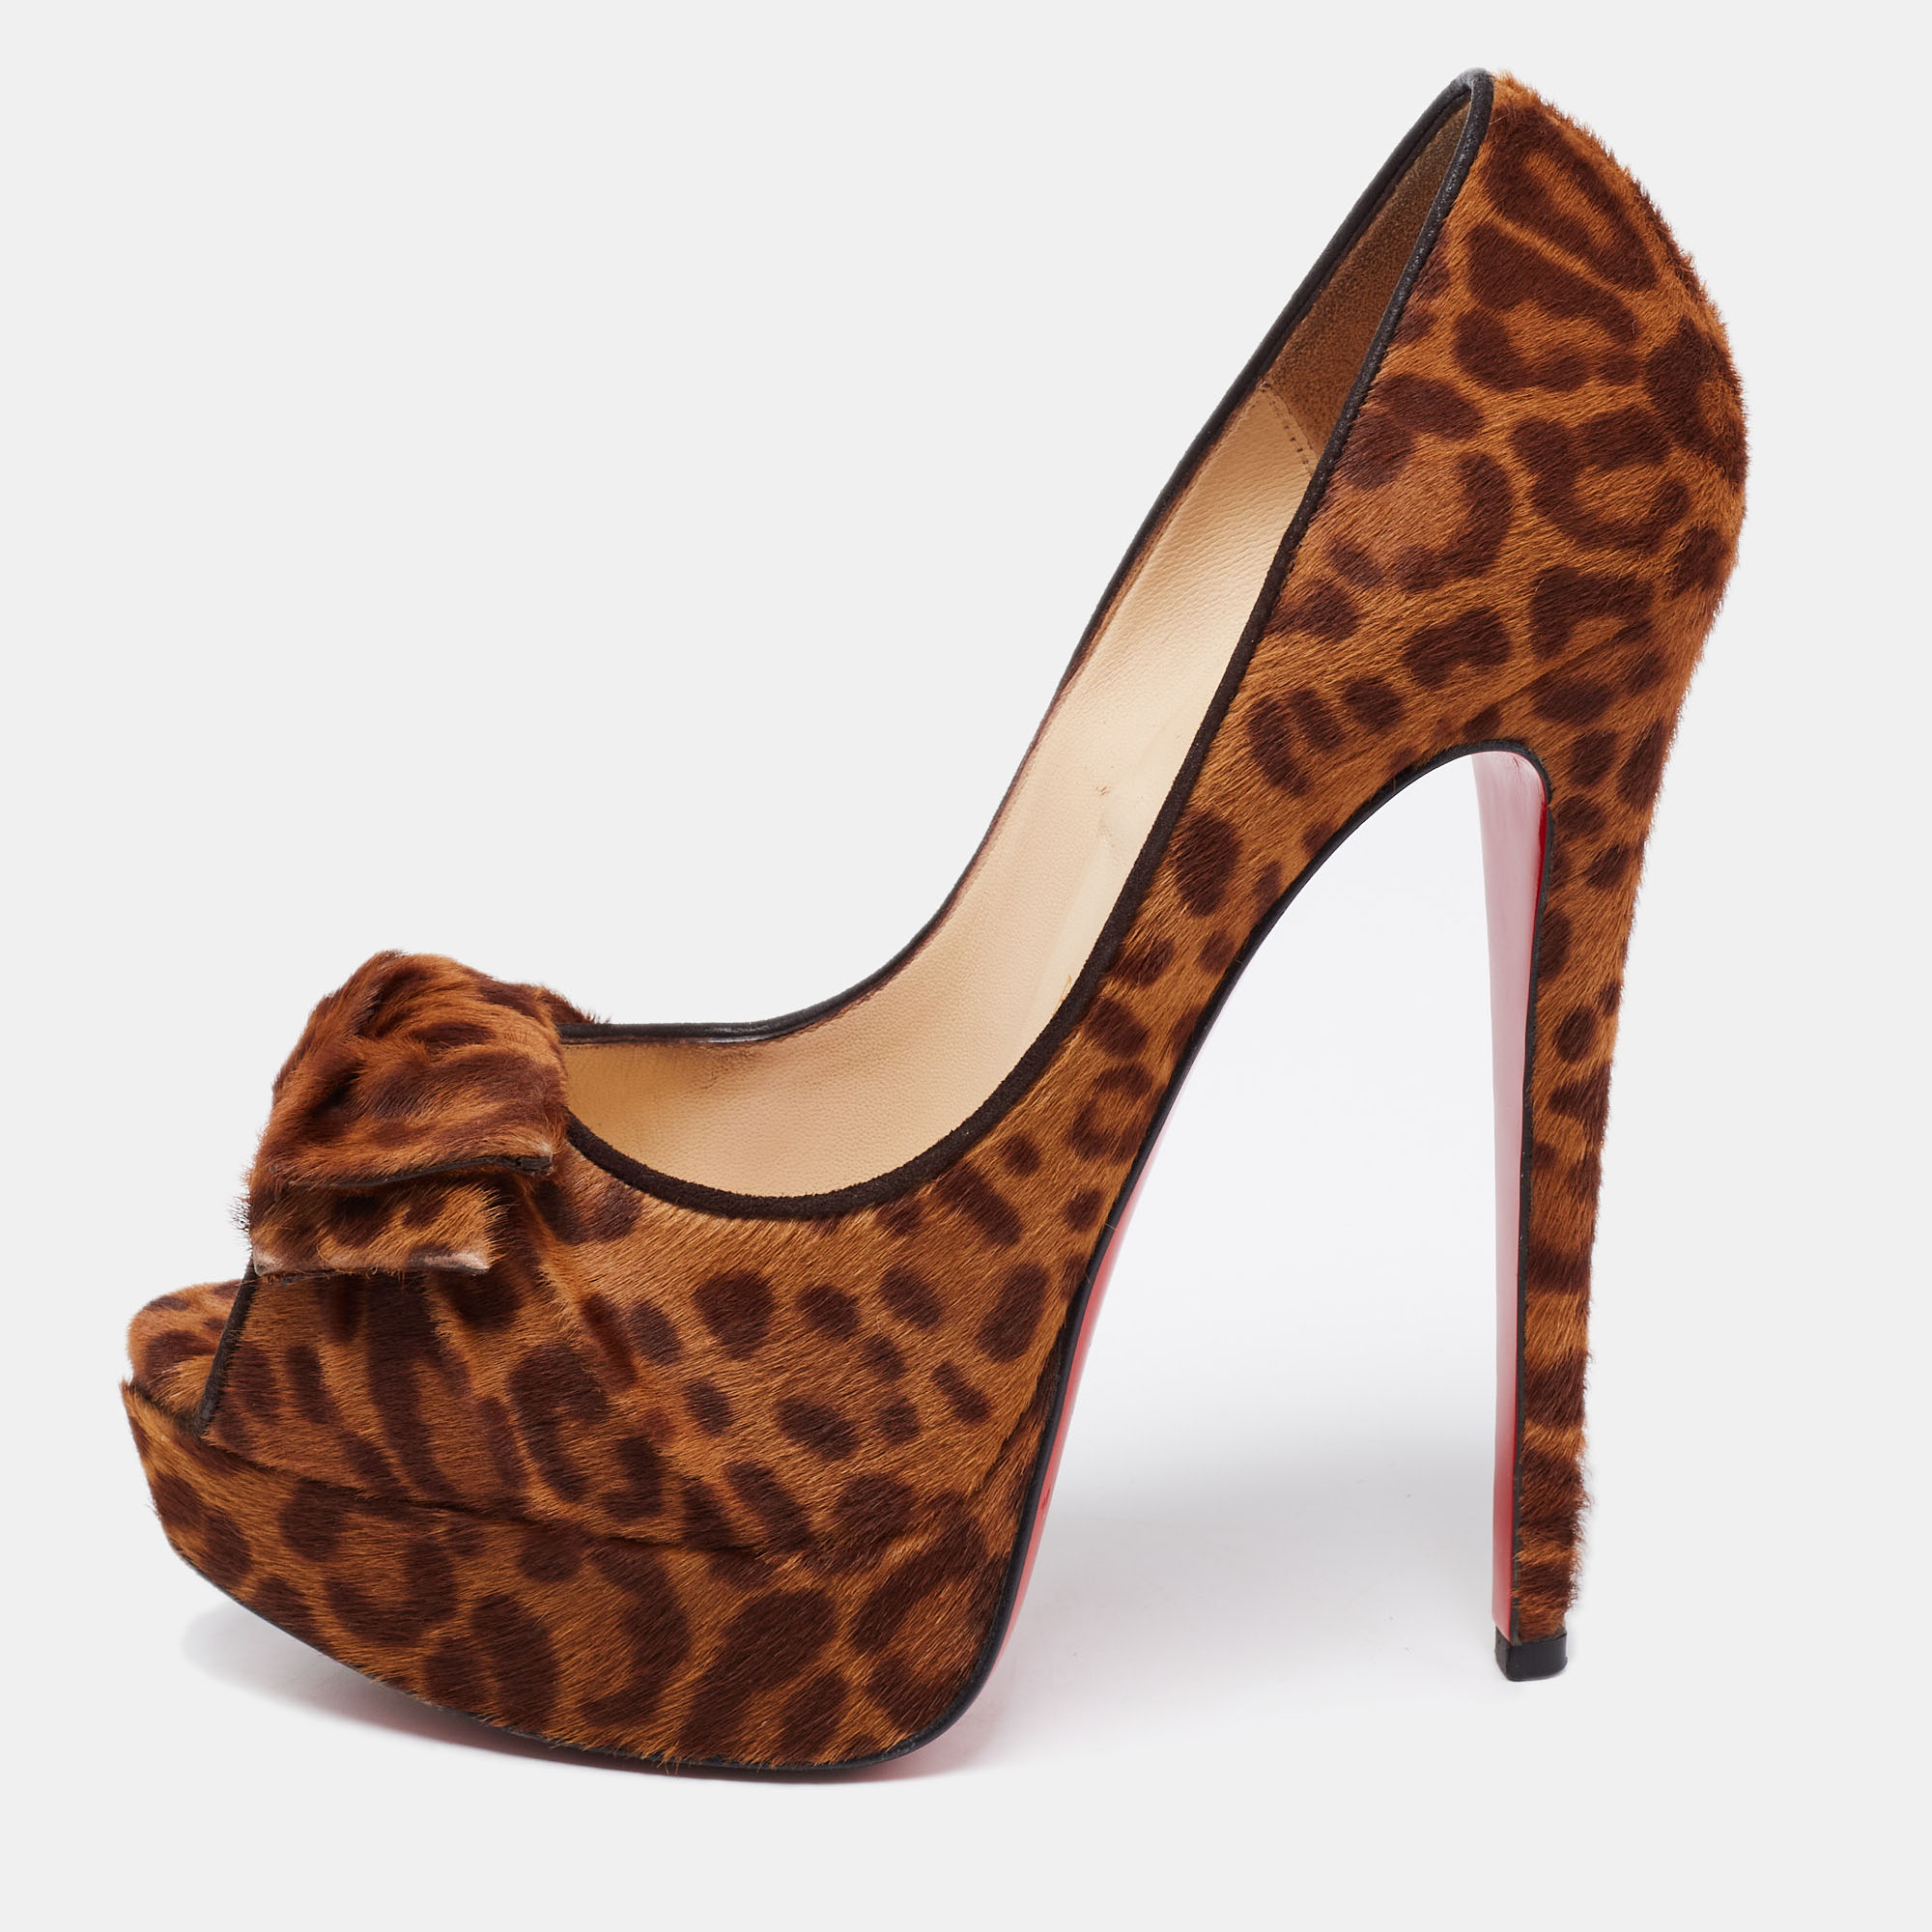 The House of Christian Louboutin brings an element of class to your closet with these stunning Lady Peep pumps. They are created using brown tan leopard printed calf hair with a bow on the front. They showcase peep toes platforms and tall heels. Make a fashion statement by wearing these pumps.